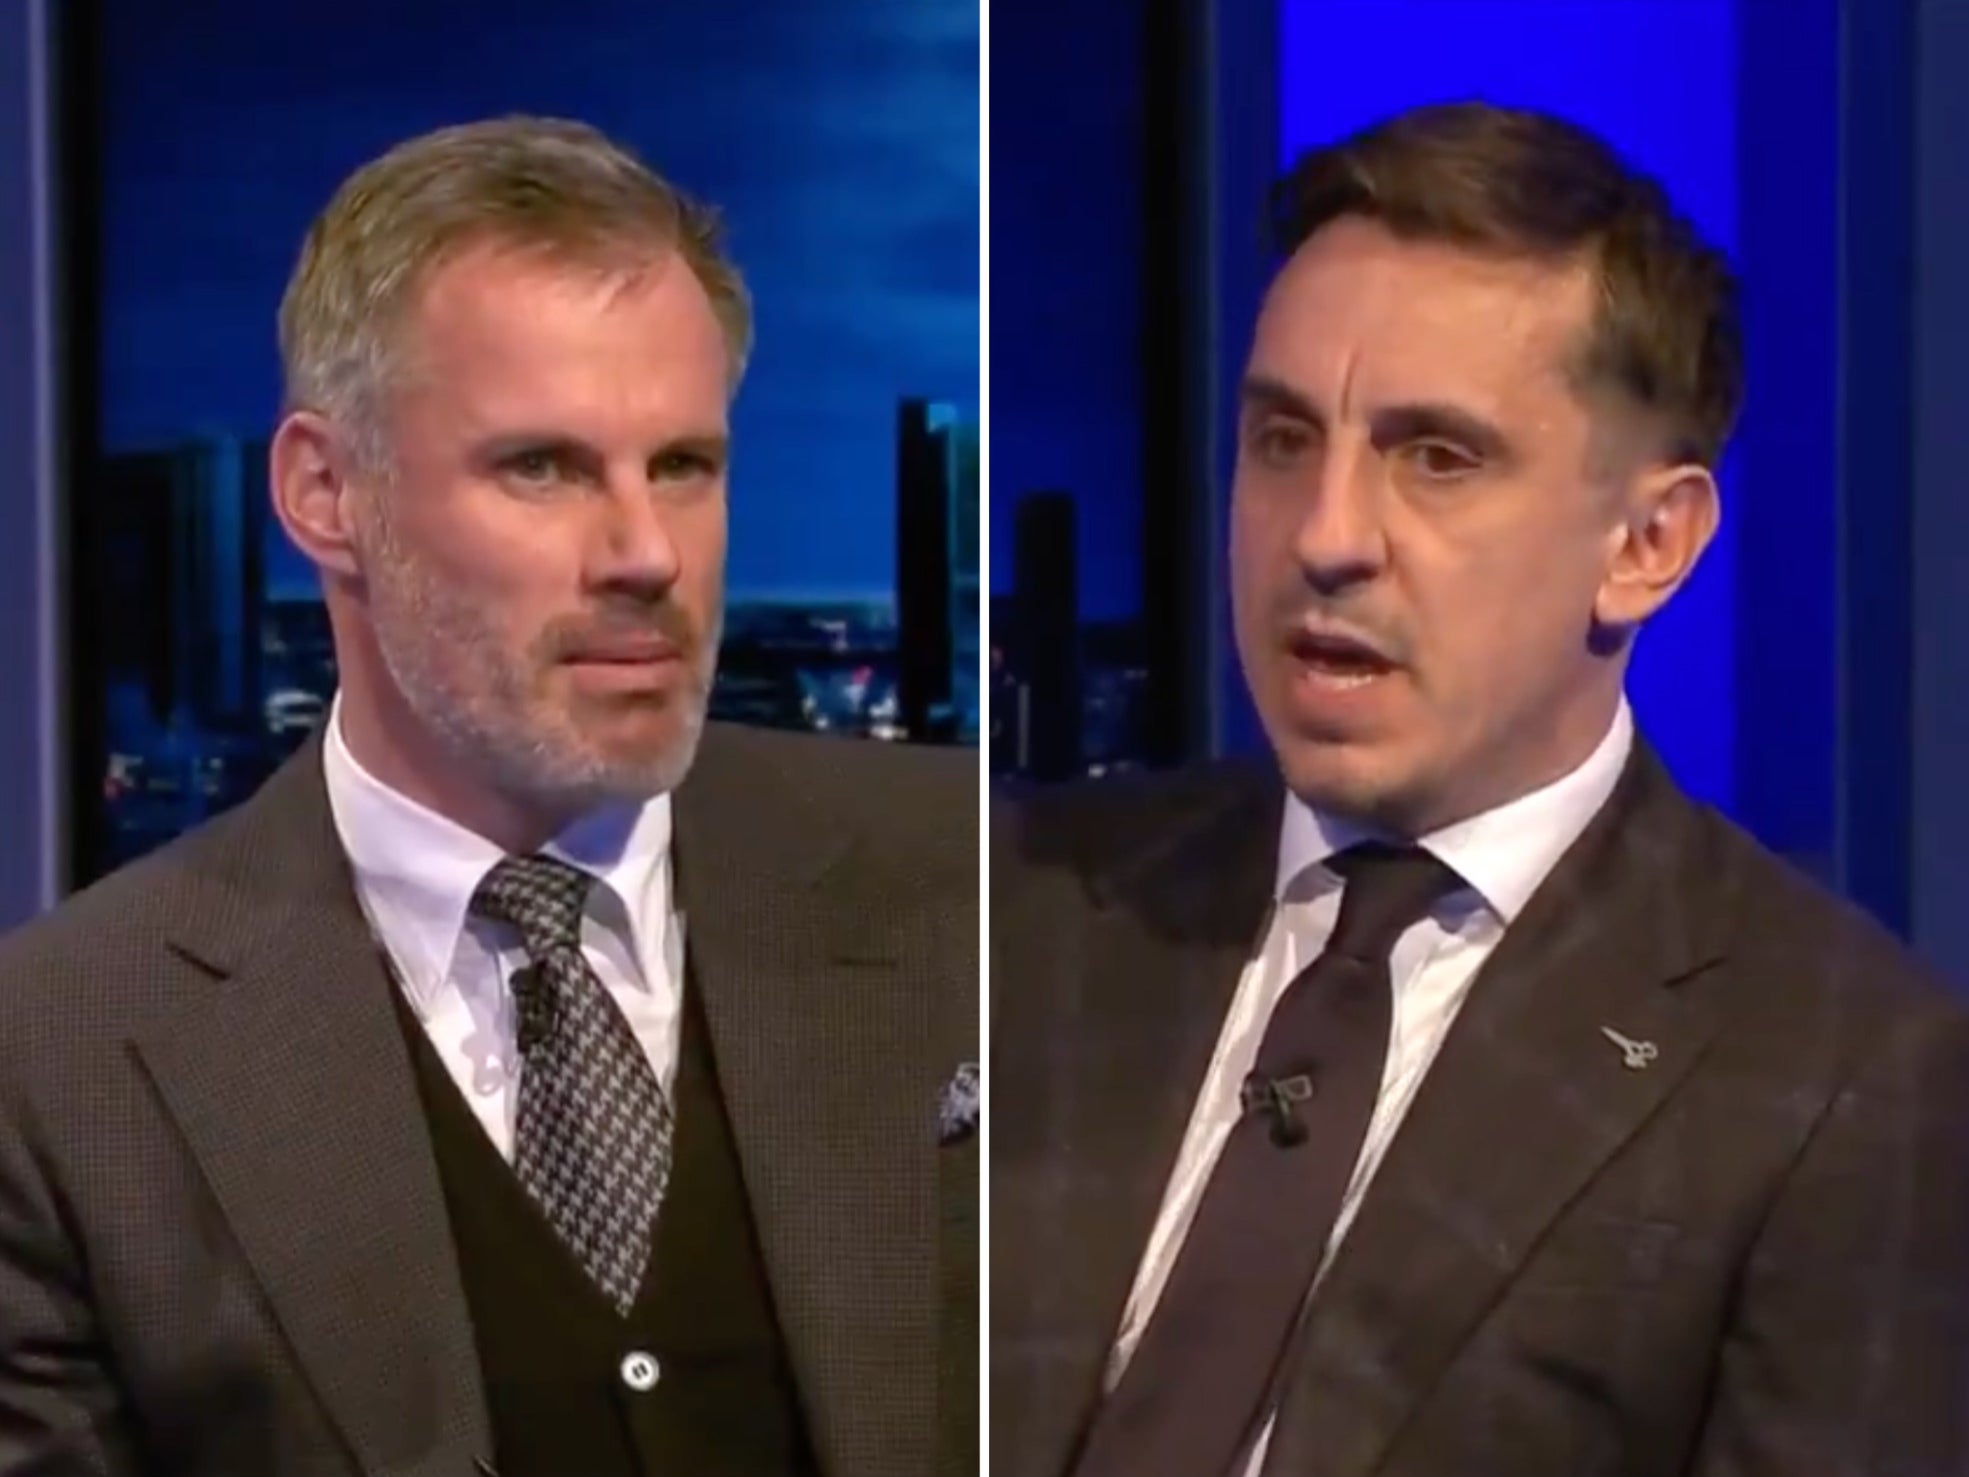 Sky Sports pundits Jamie Carragher and Gary Neville make their predictions for the next Premier League season